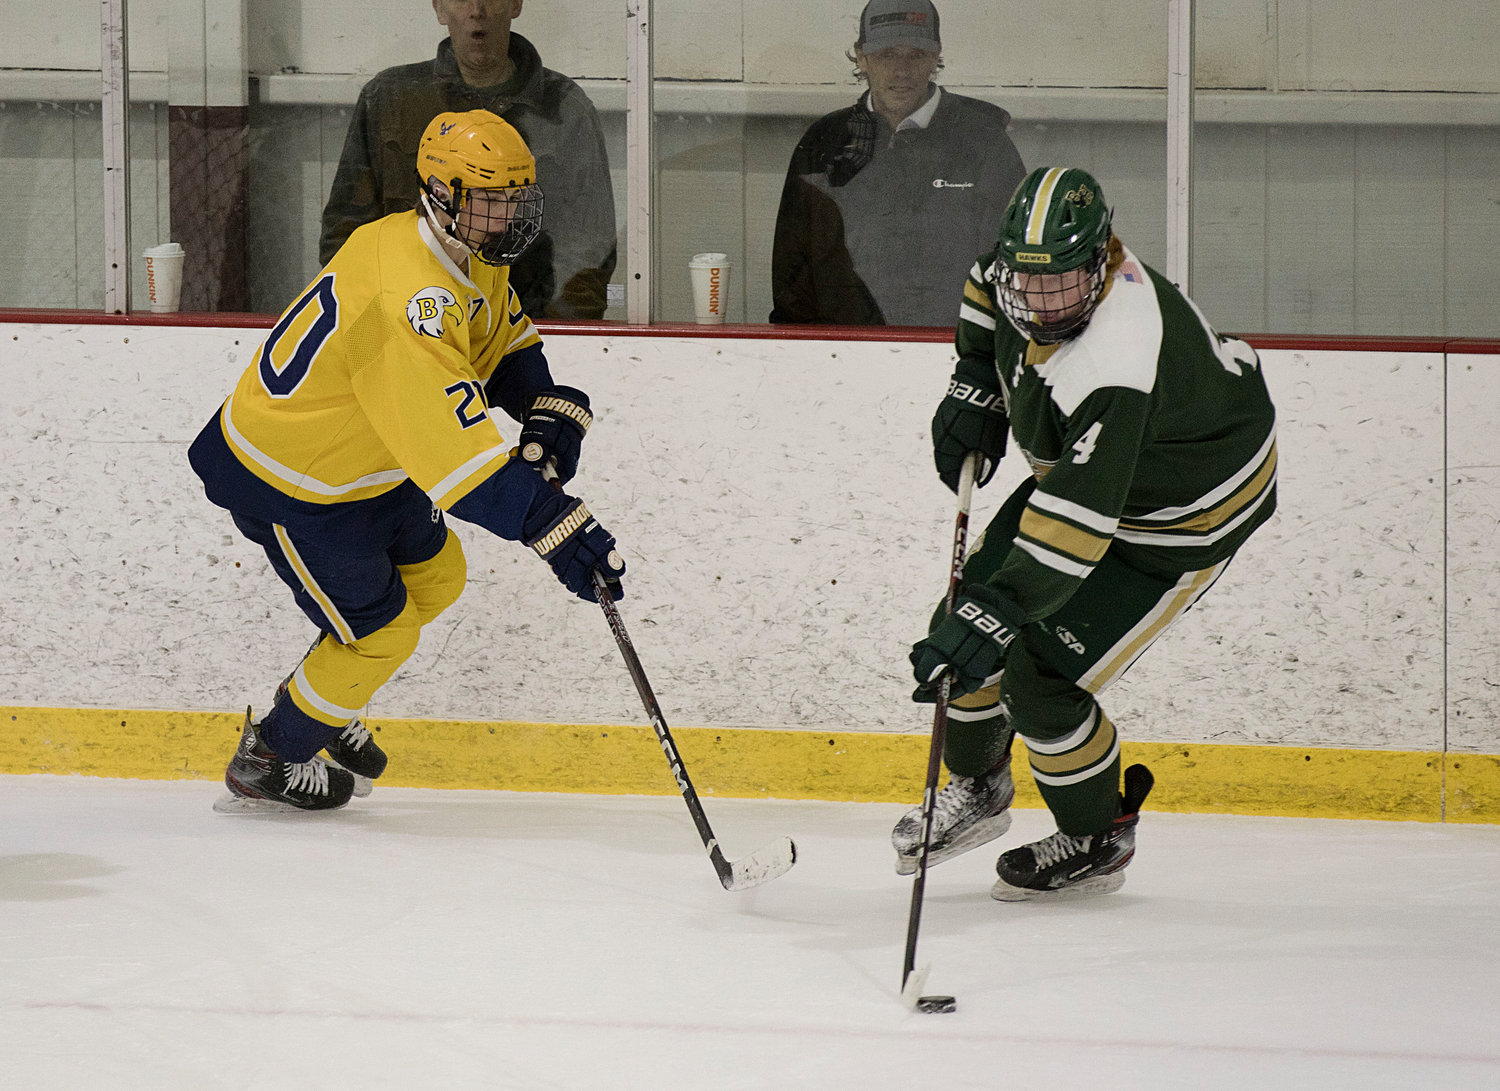 Henry Kelsey pressures a Hendricken opponent while competing in game two of the Division 1 quarterfinal series, Saturday.